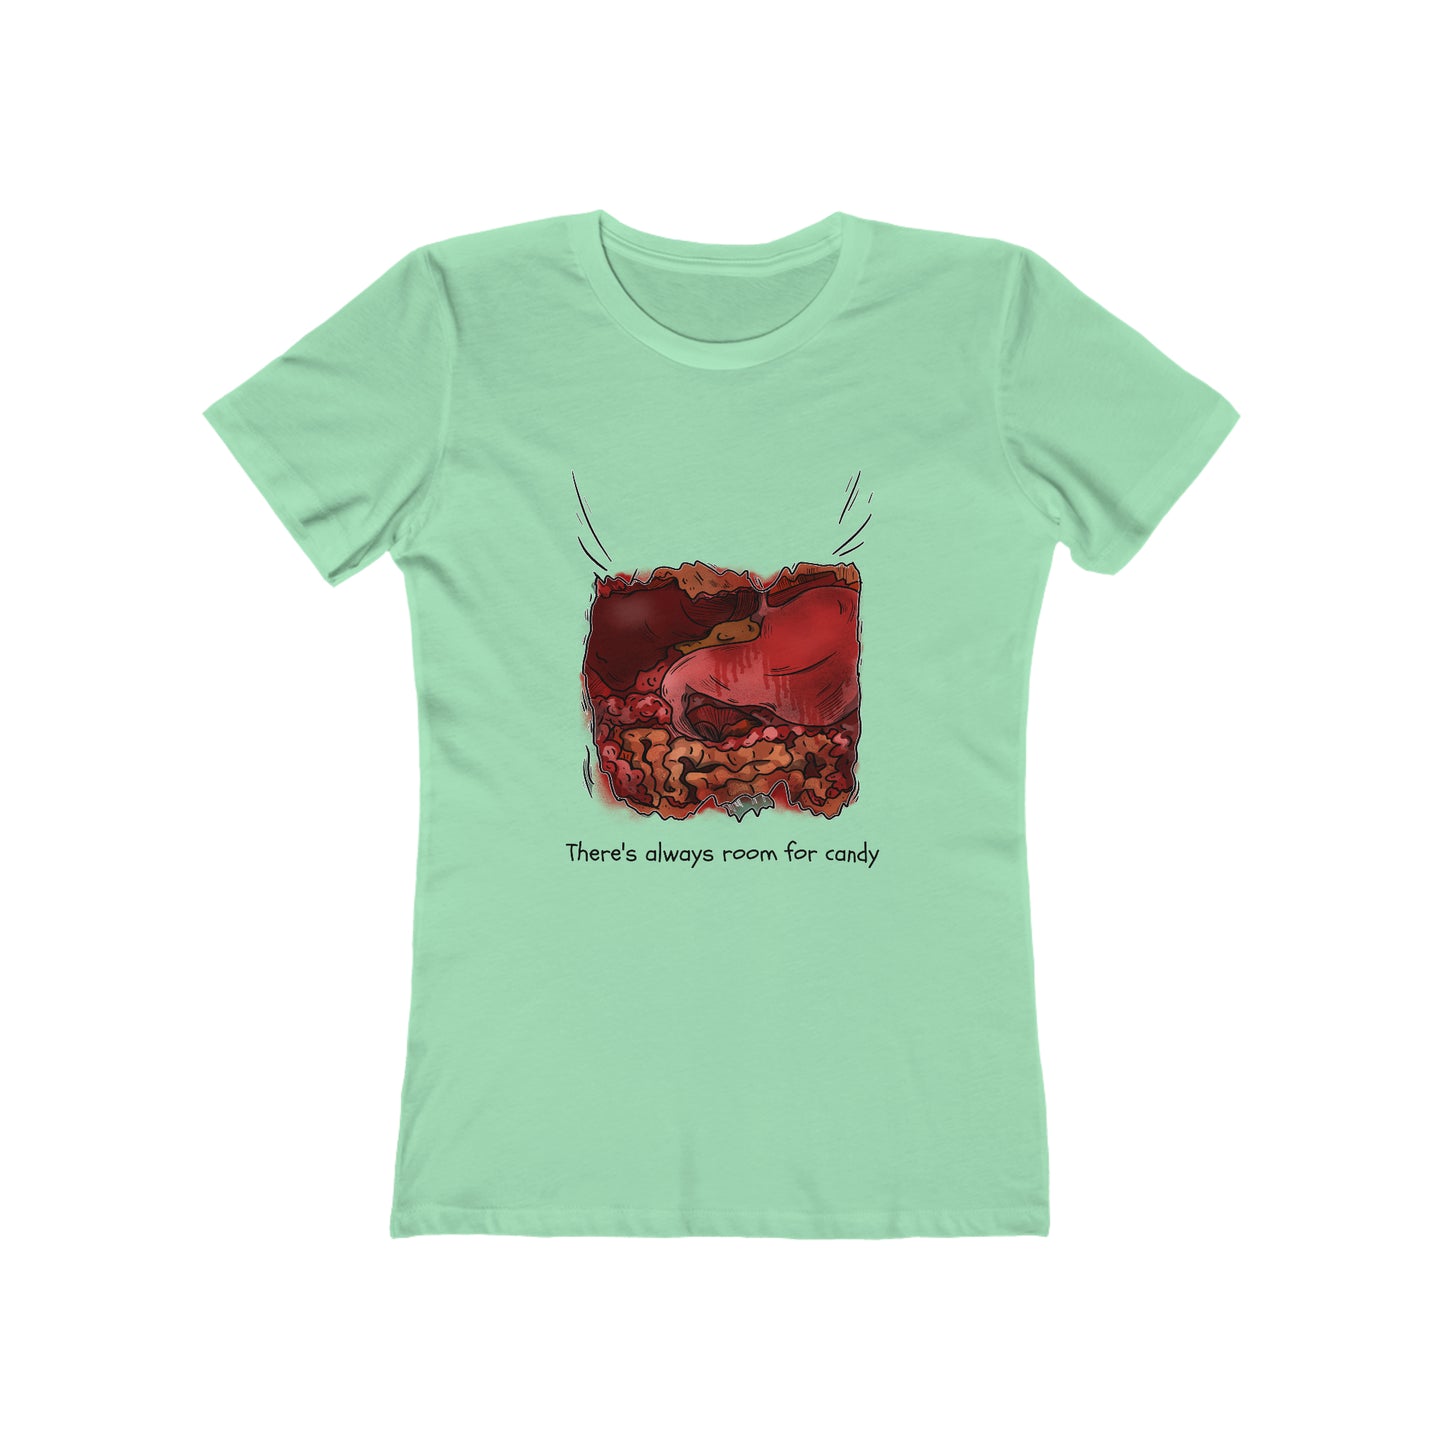 There's Always Room for Candy - Women's T-shirt